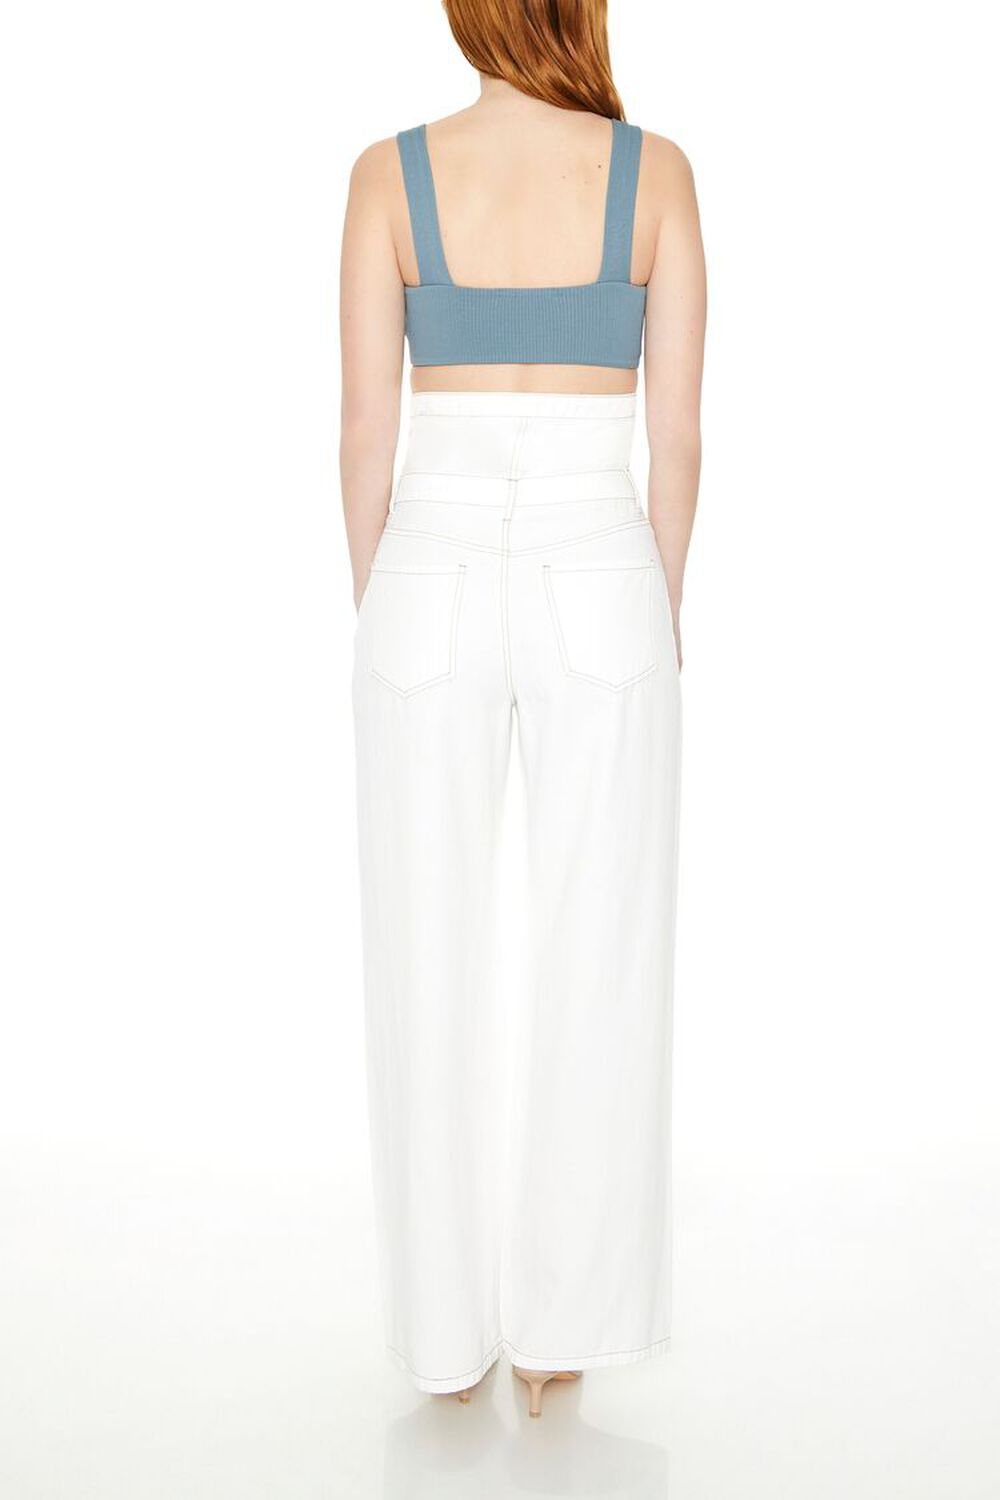 WHITE High-Rise Wide-Leg Jeans, image 3